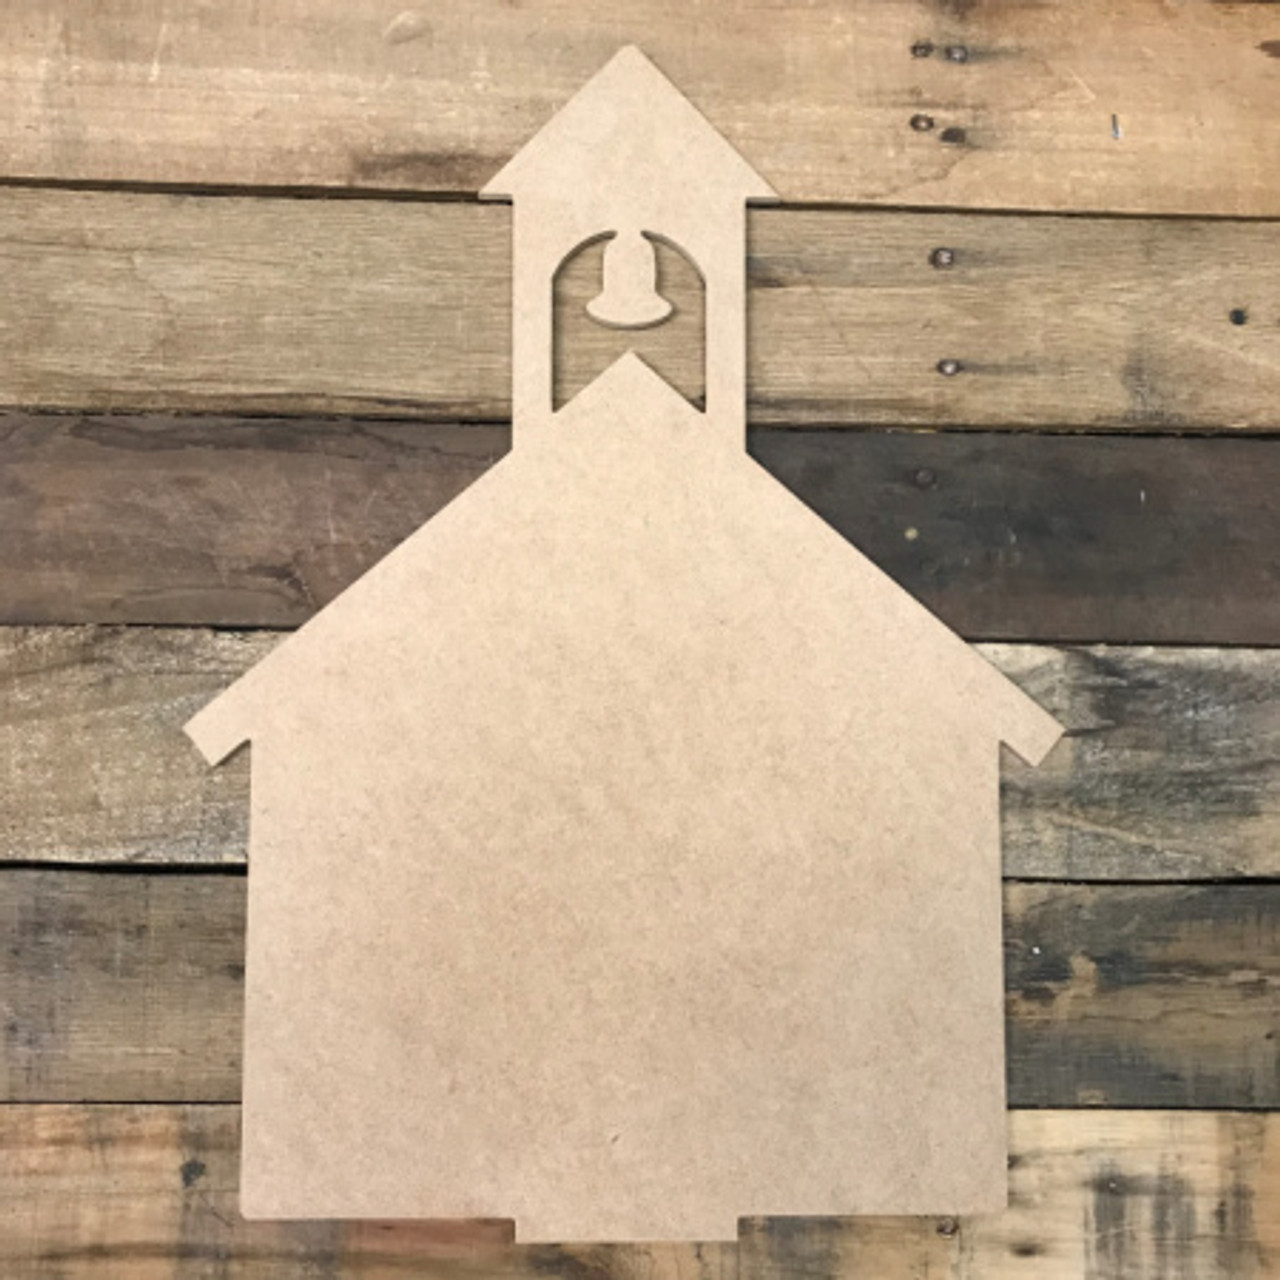 School House, Unfinished Wooden Cutout Craft